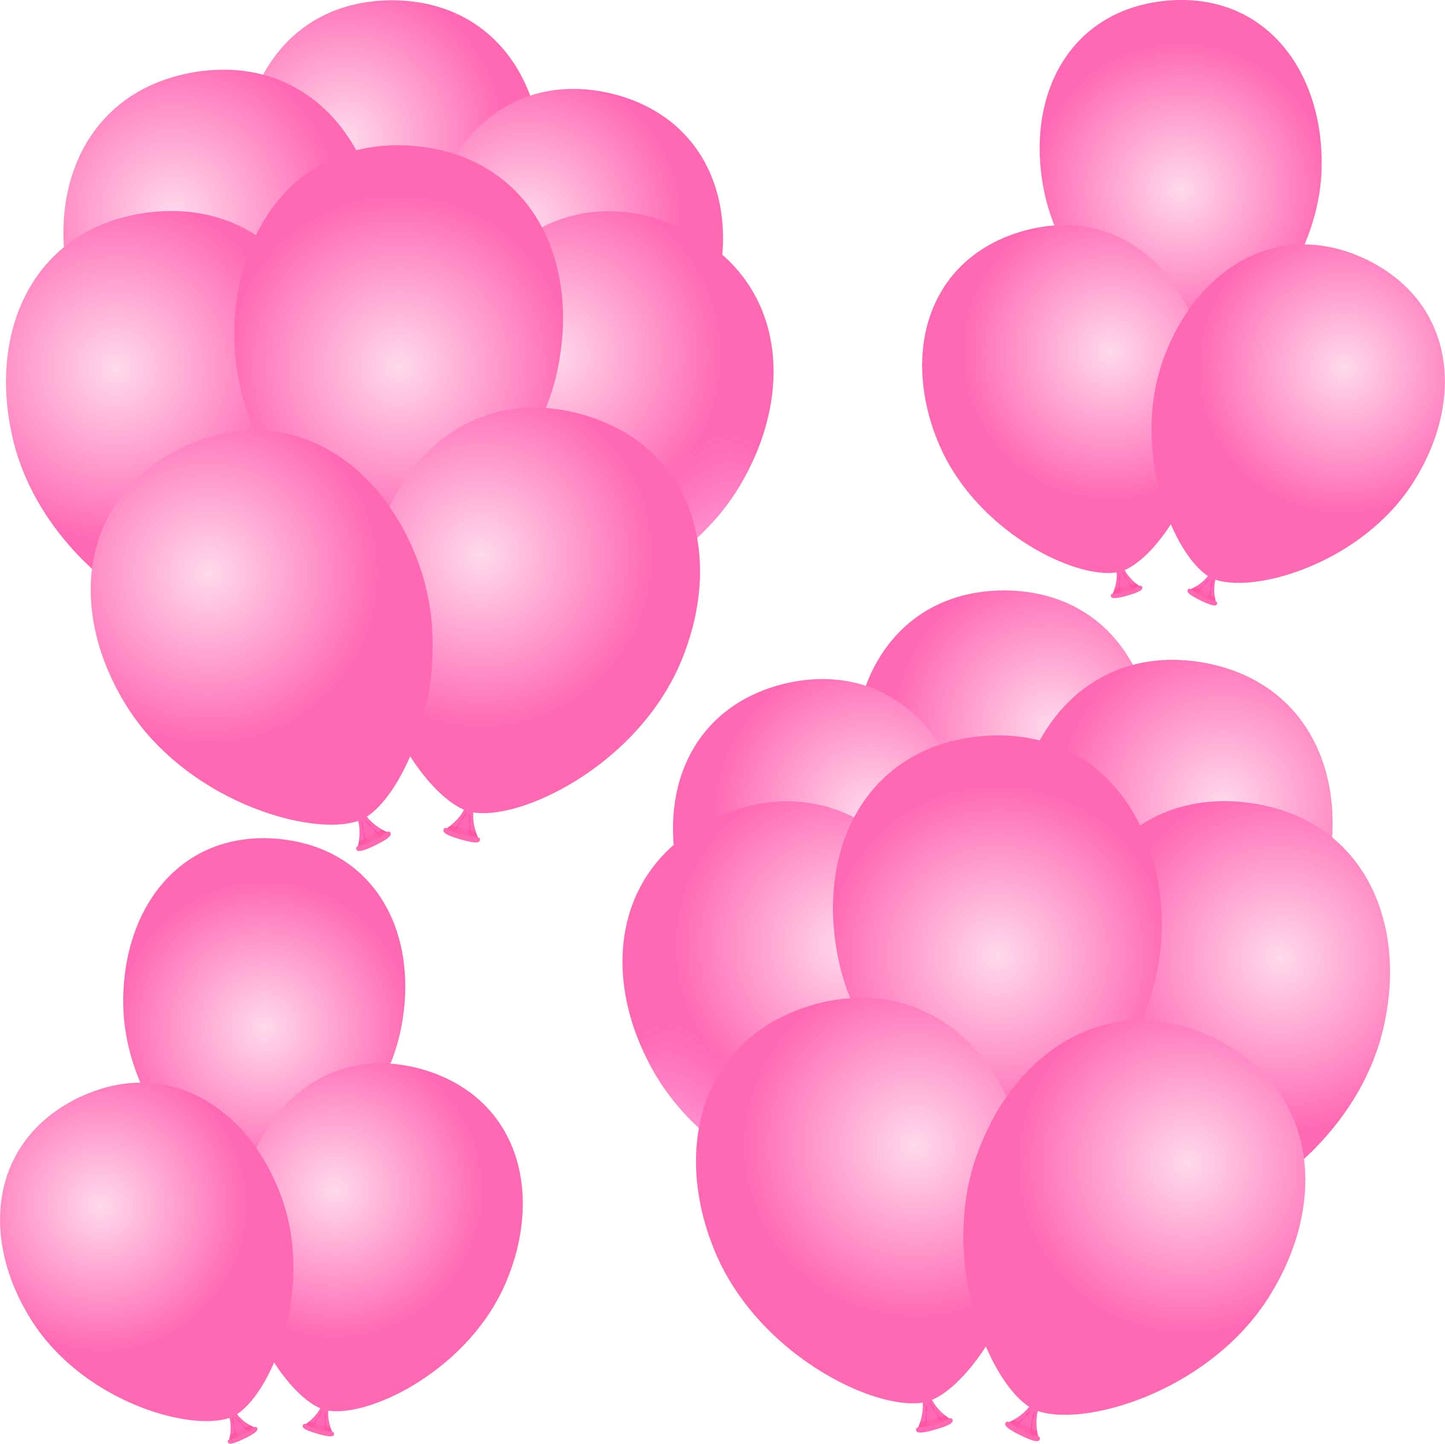 Solid Pink Balloons Half Sheet Misc.